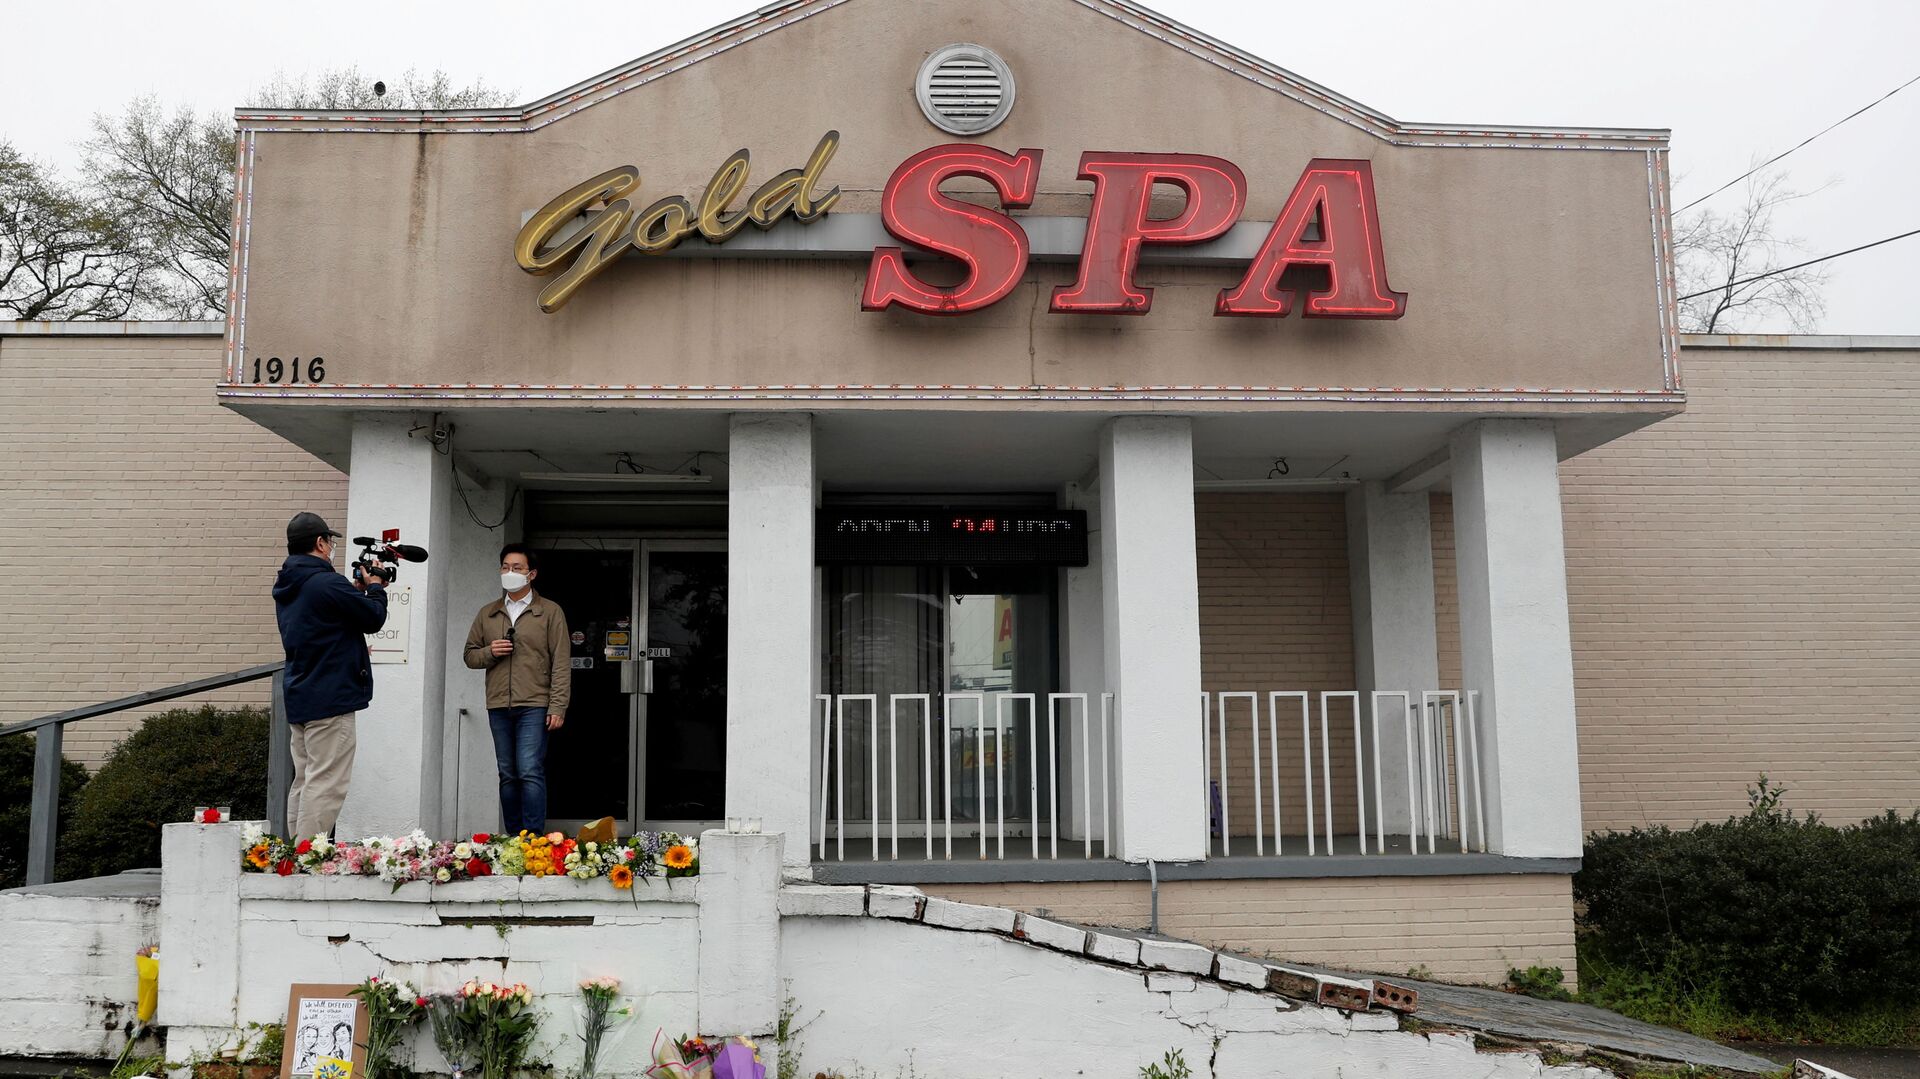 Flowers are laid in front of Gold Spa following the deadly shootings in Atlanta, Georgia, U.S. March 17, 2021 - Sputnik International, 1920, 18.03.2021